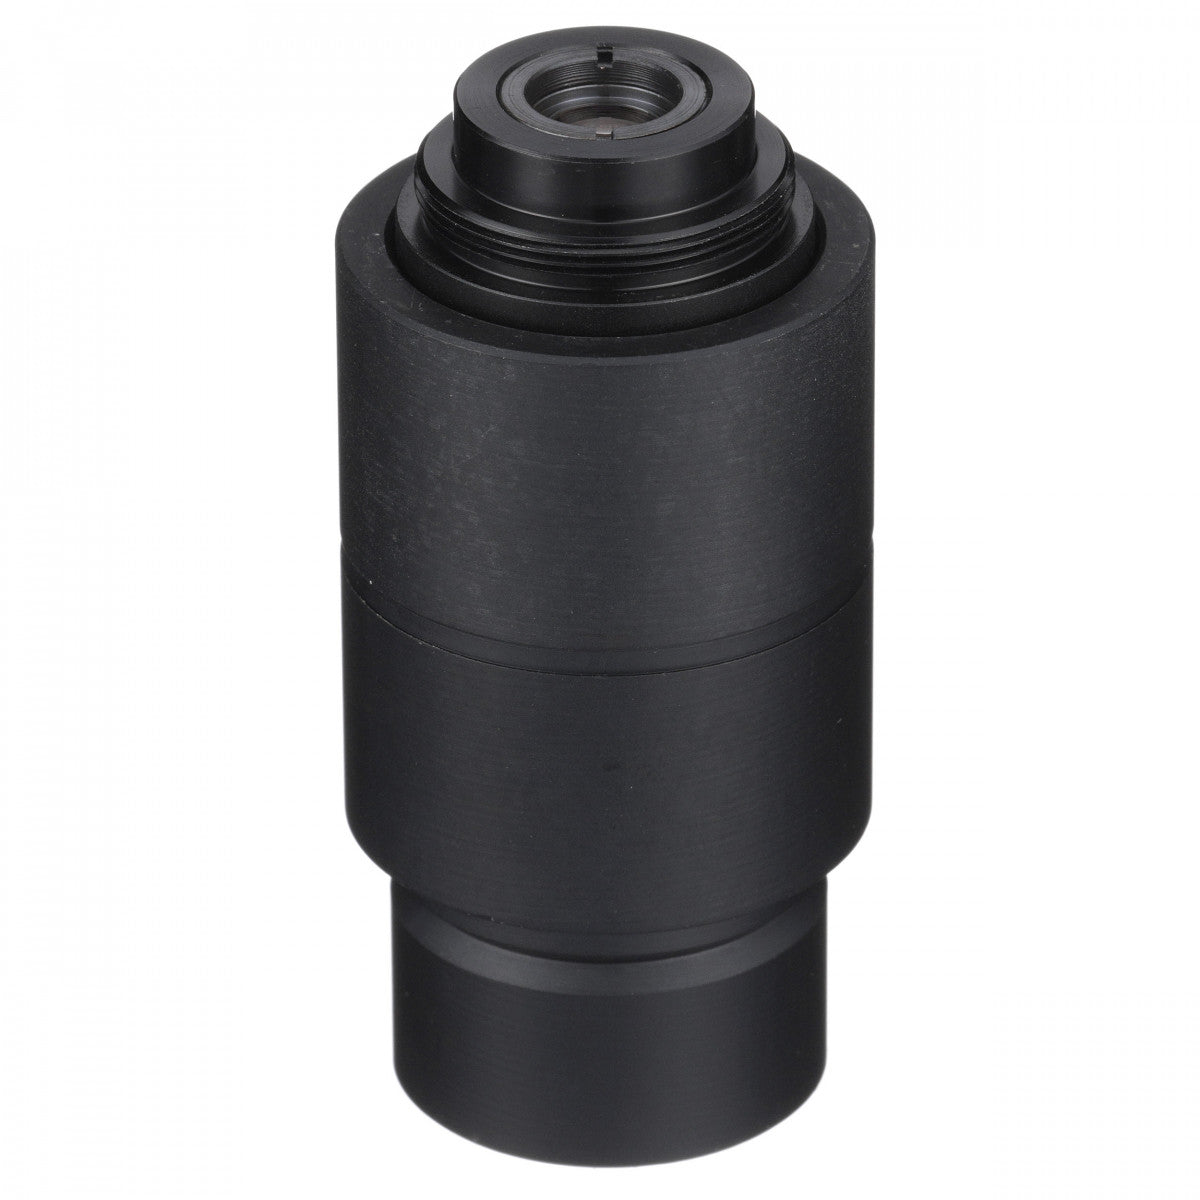 Accu-Scope C-Mount Adapters For EXI-410 Microscope